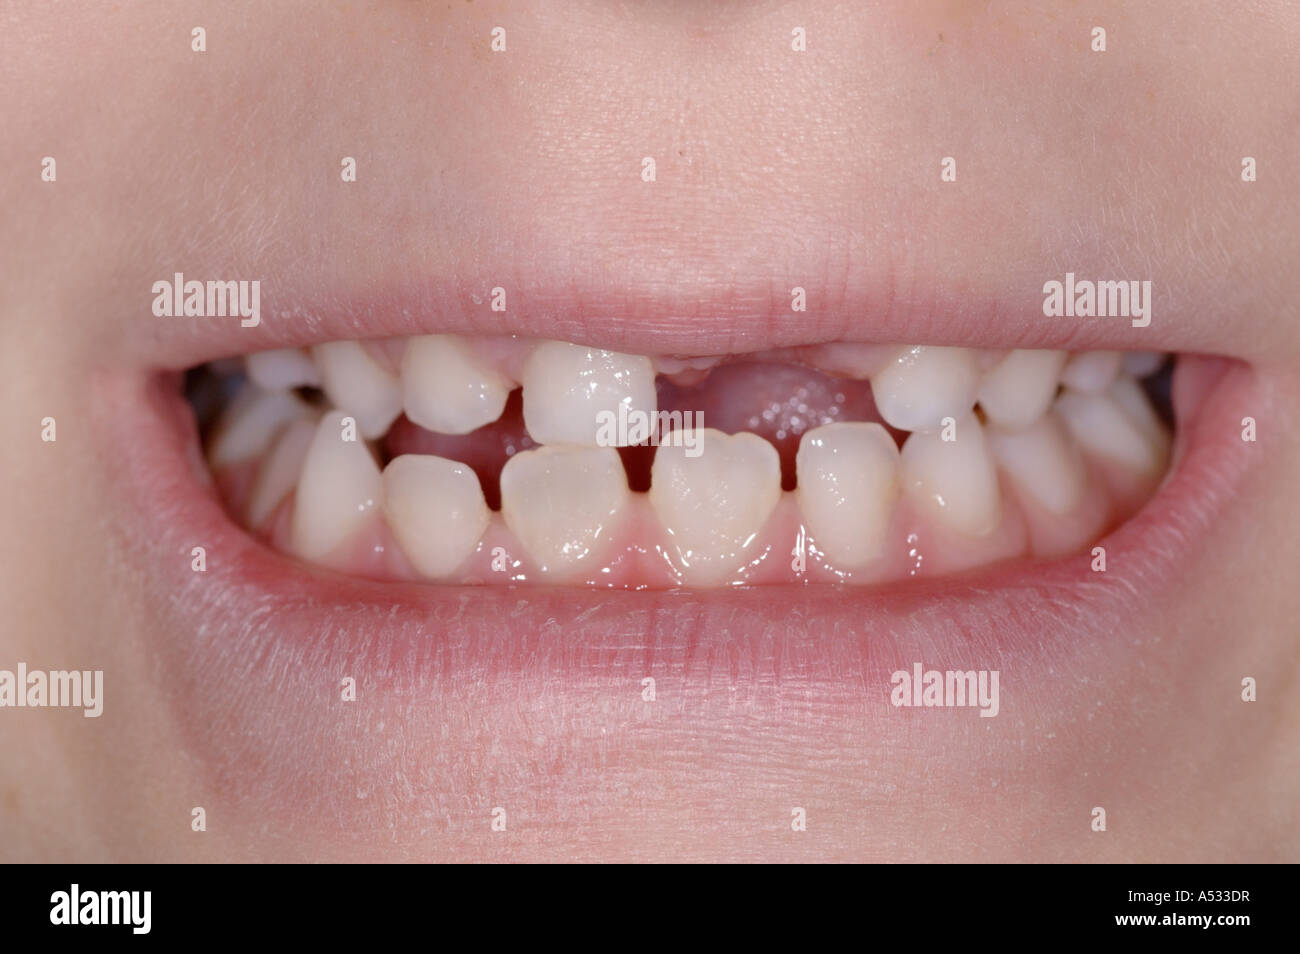 Smile with recently missing front tooth Stock Photo